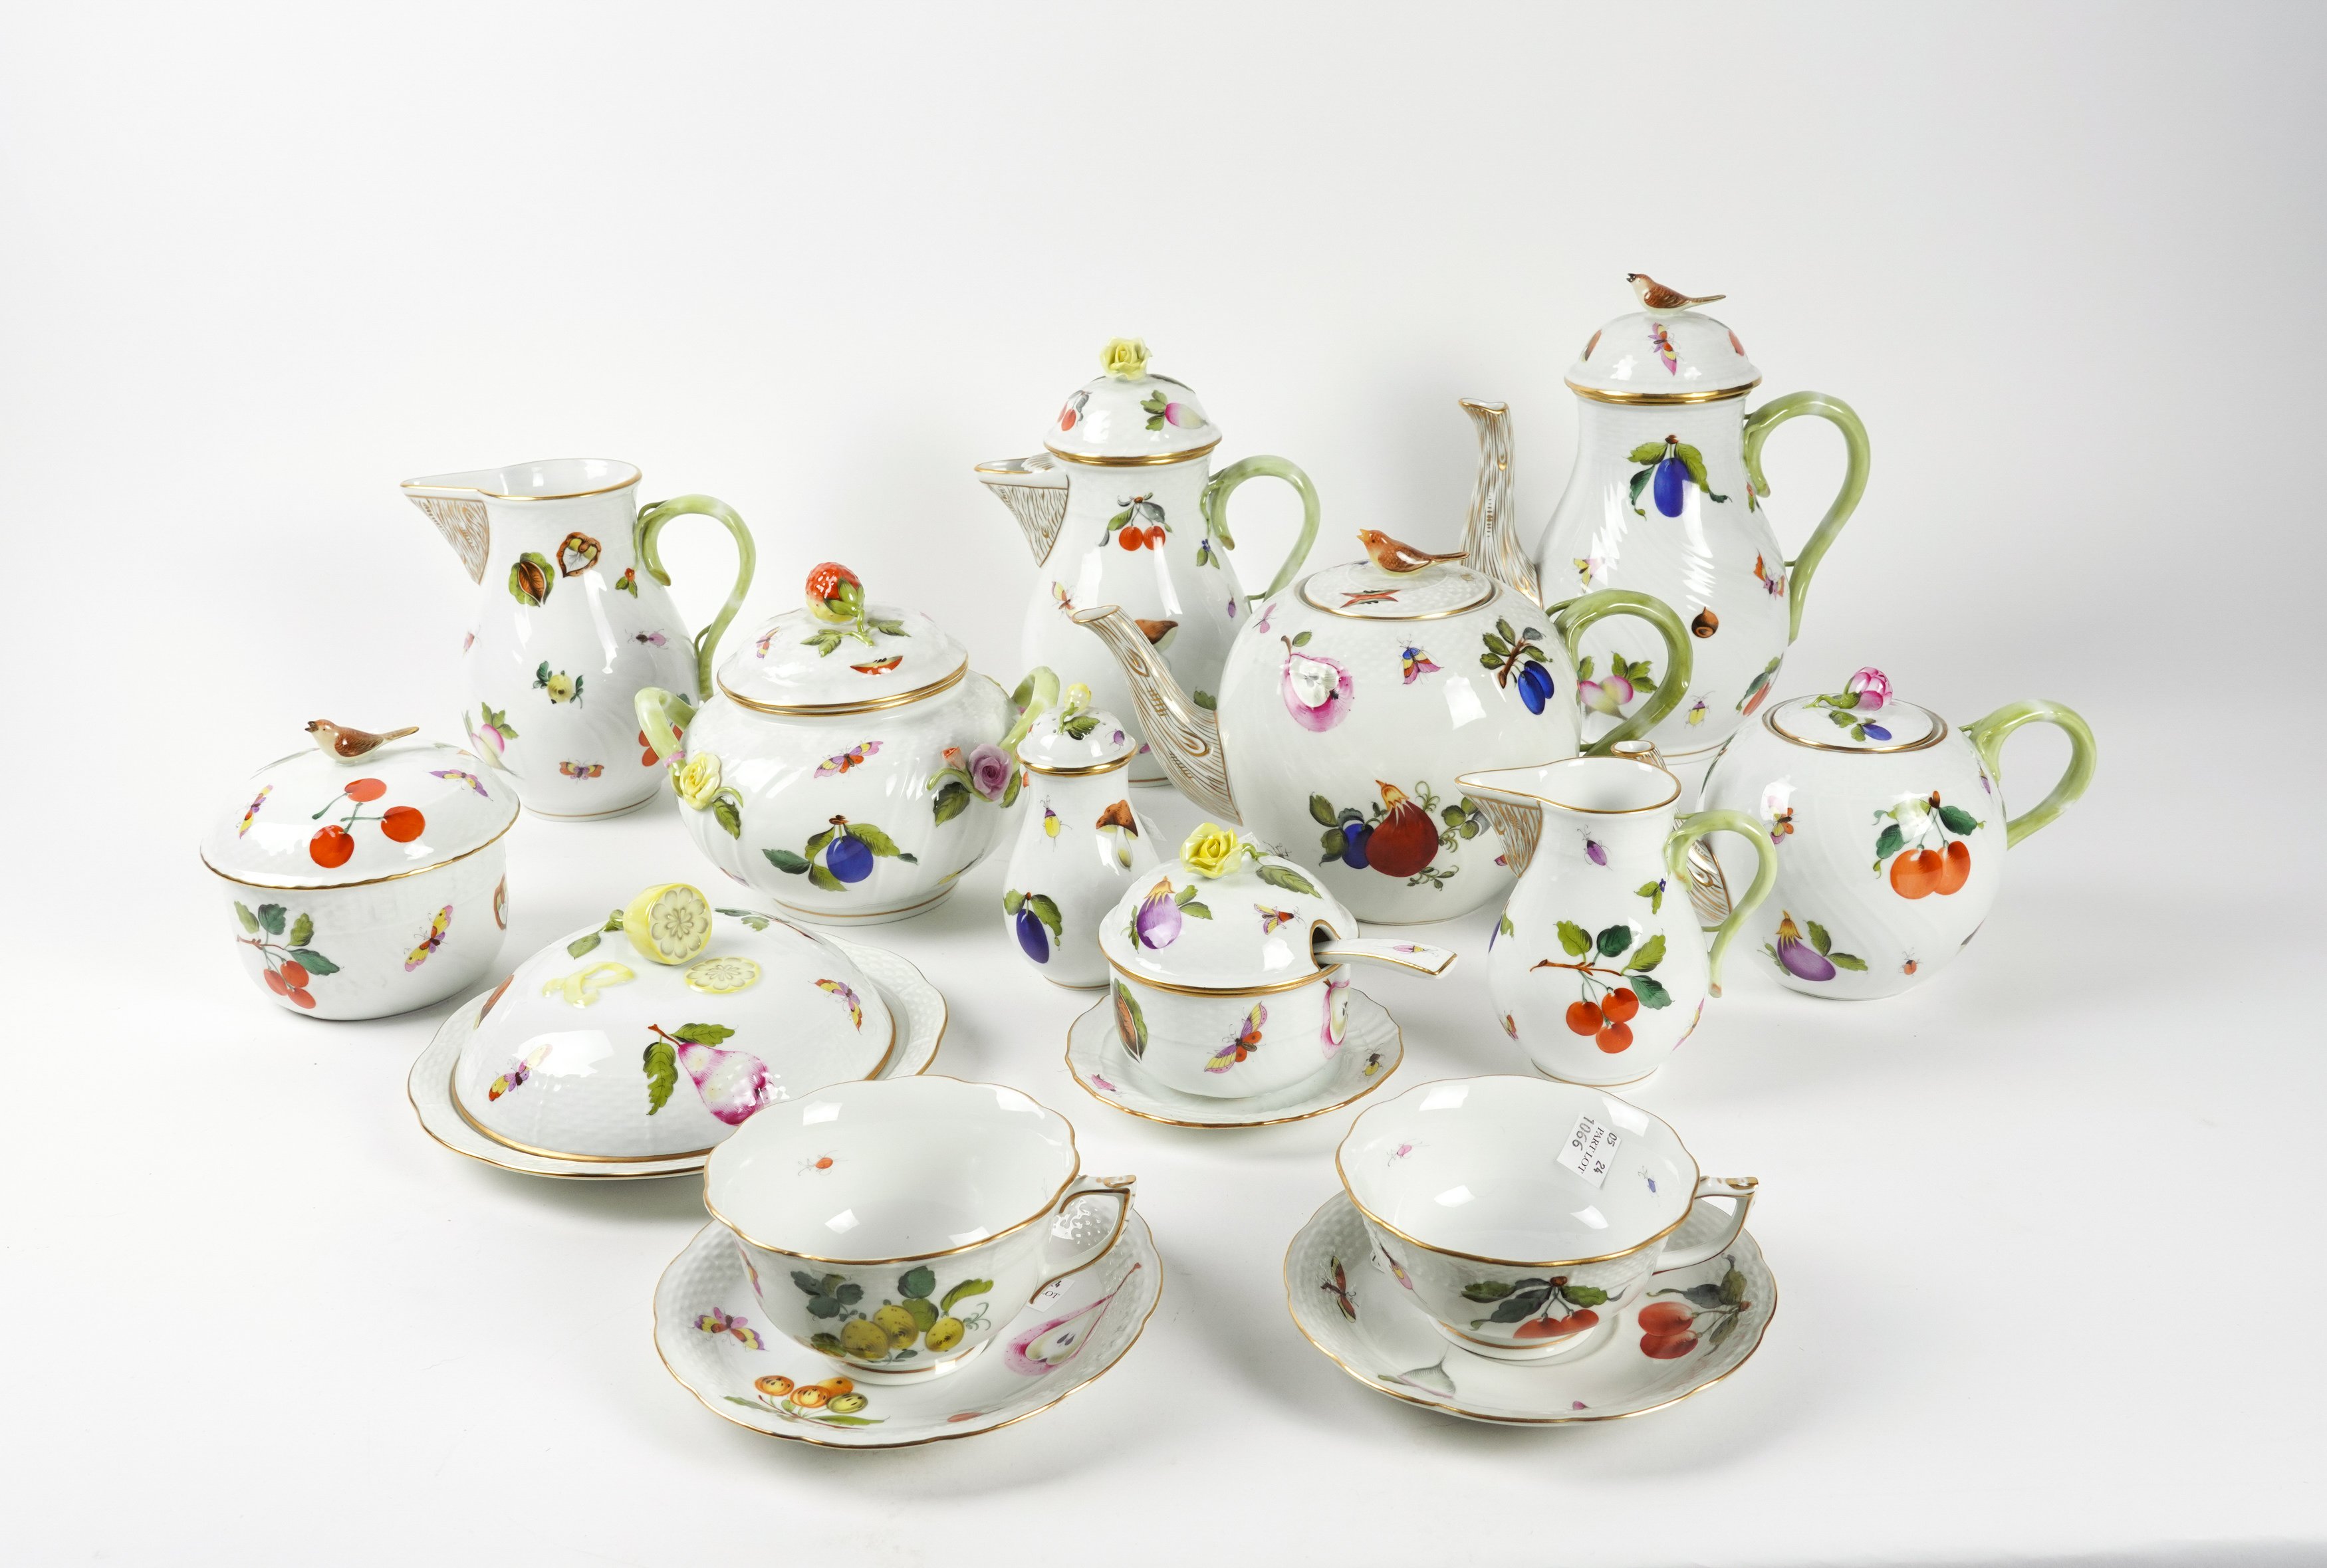 AN ASSEMBLED GROUP OF HEREND `MARKET GARDEN' PATTERN TEA, COFFEE AND BREAKFAST WARES - Image 2 of 5